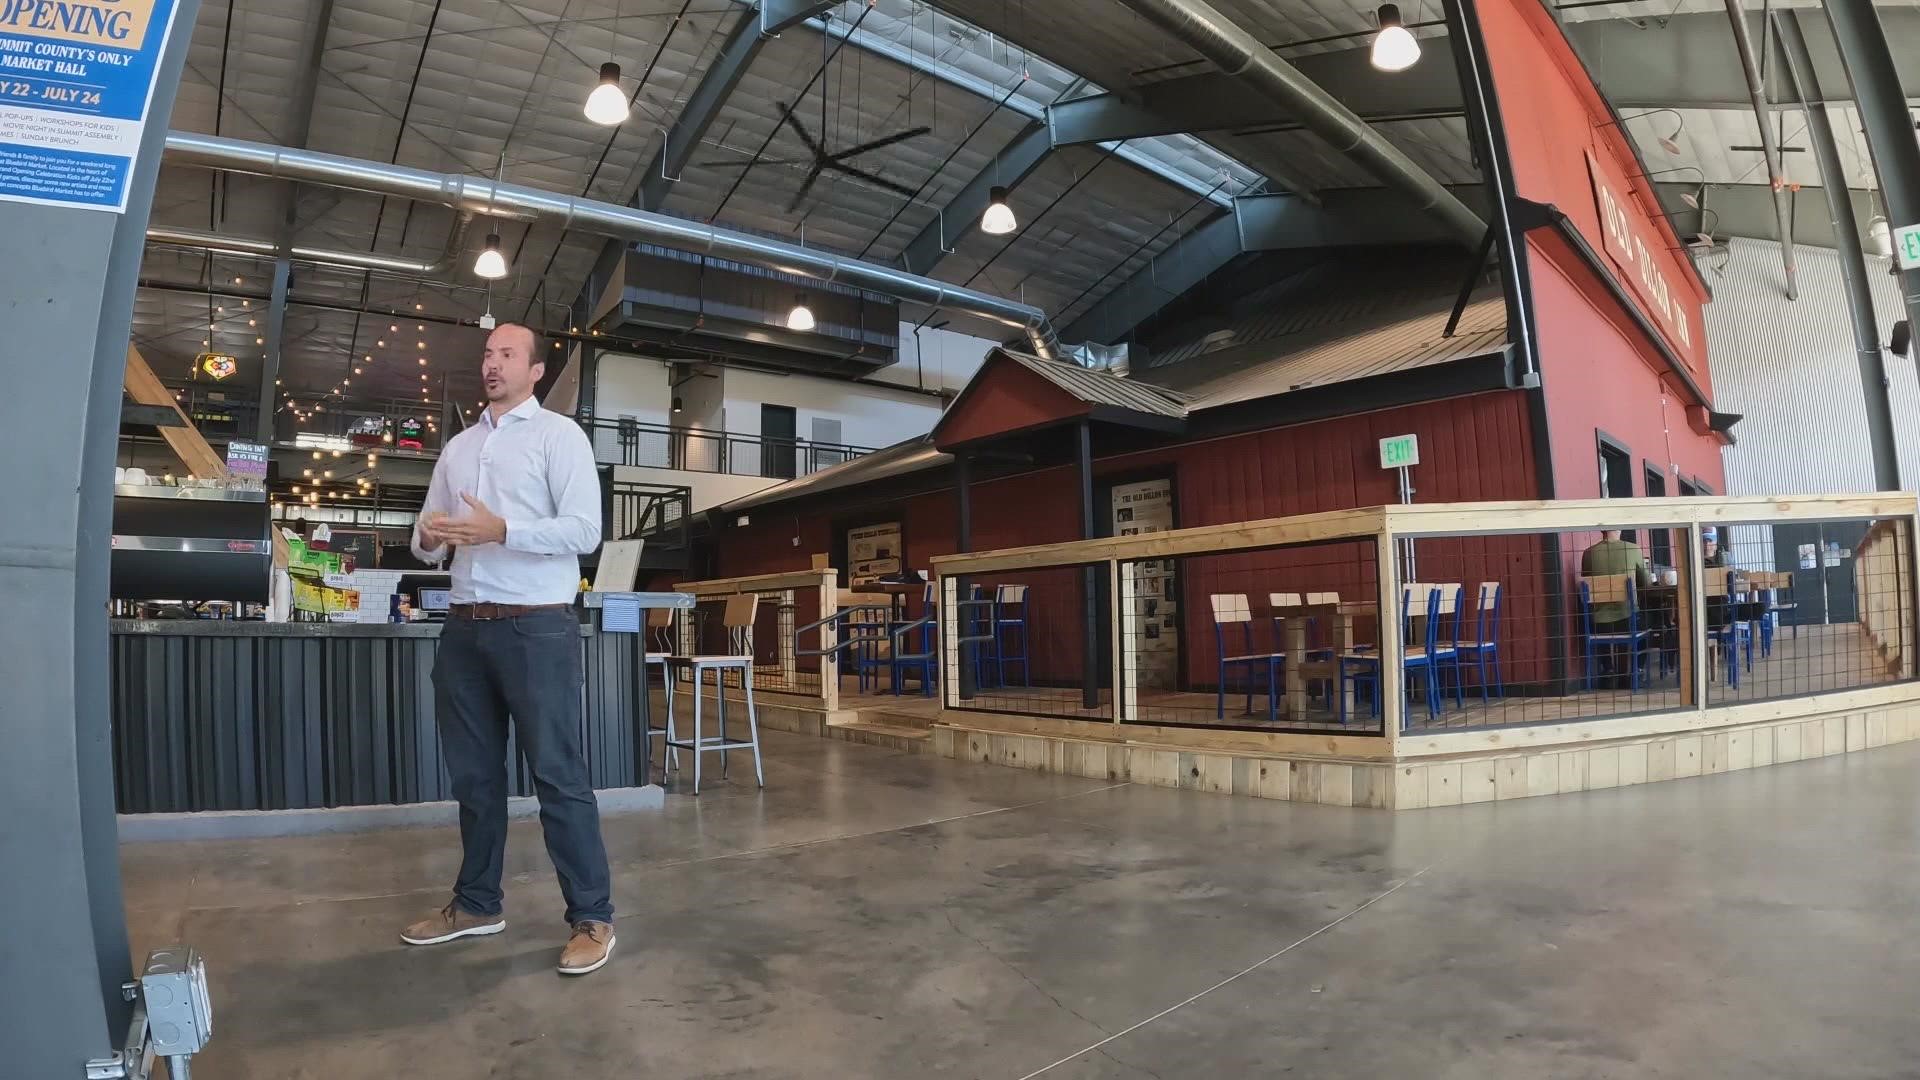 The market hall was scheduled to open back in December, but delayed to give the small business owners a chance to open.